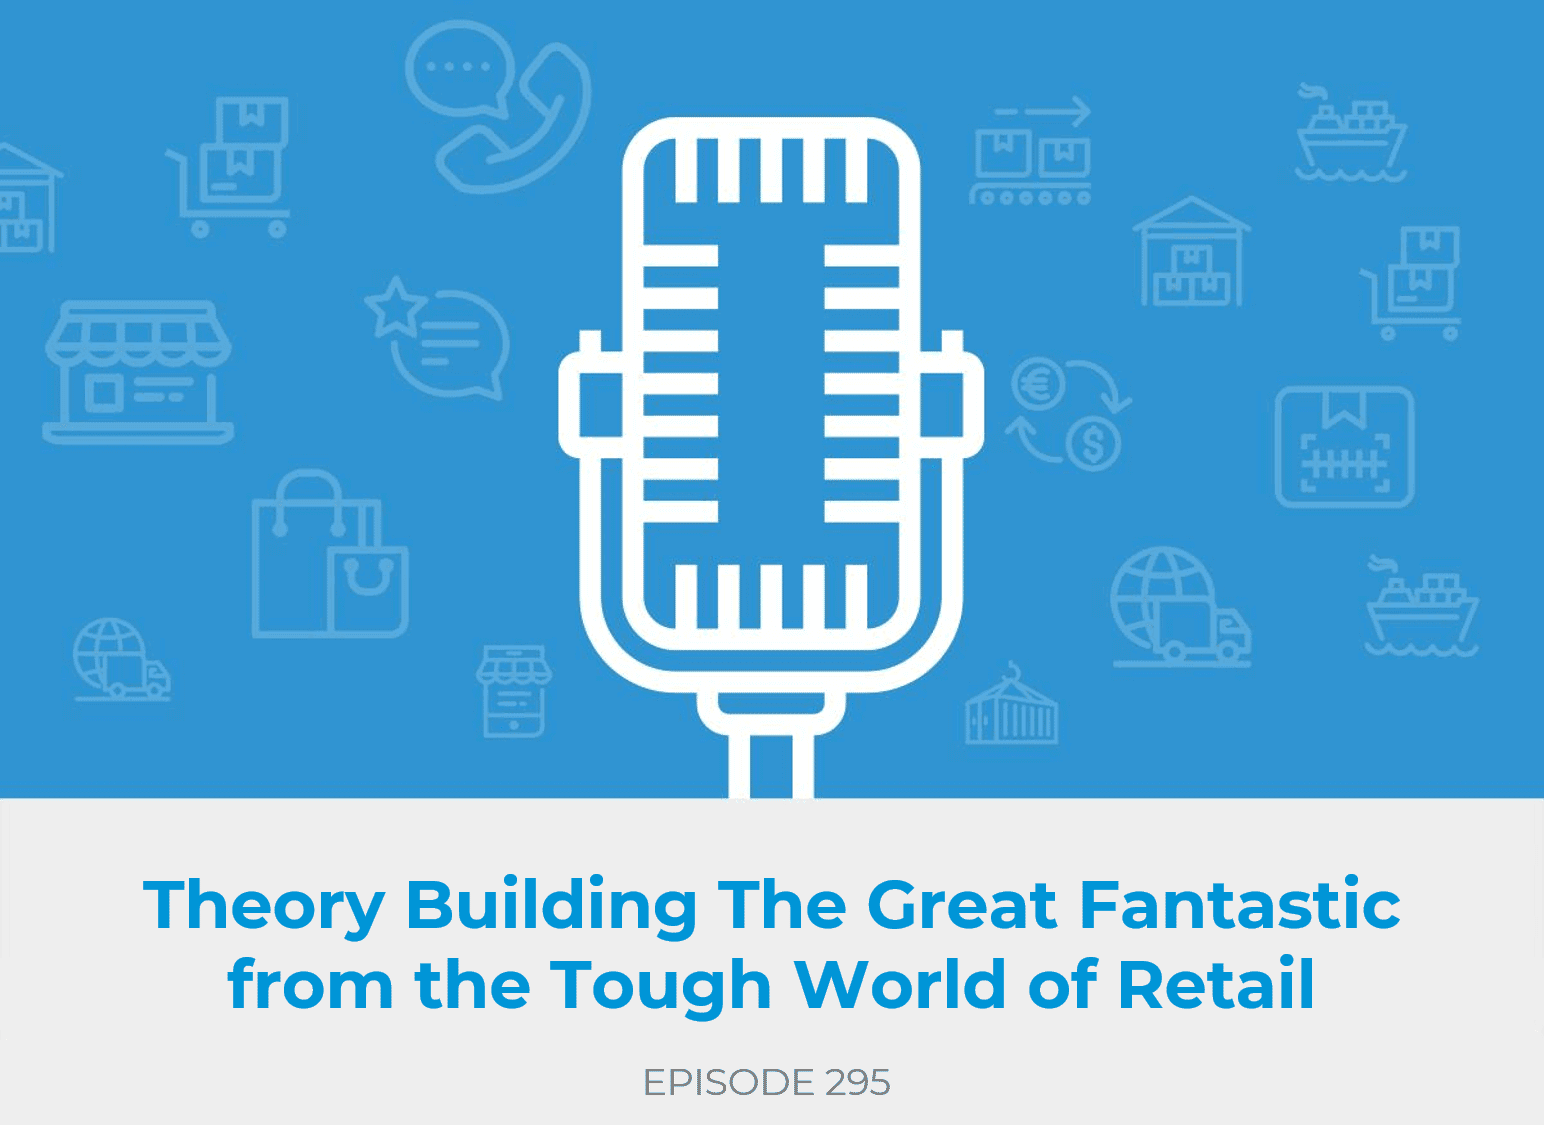 Building The Great Fantastic from the Tough World of Retail